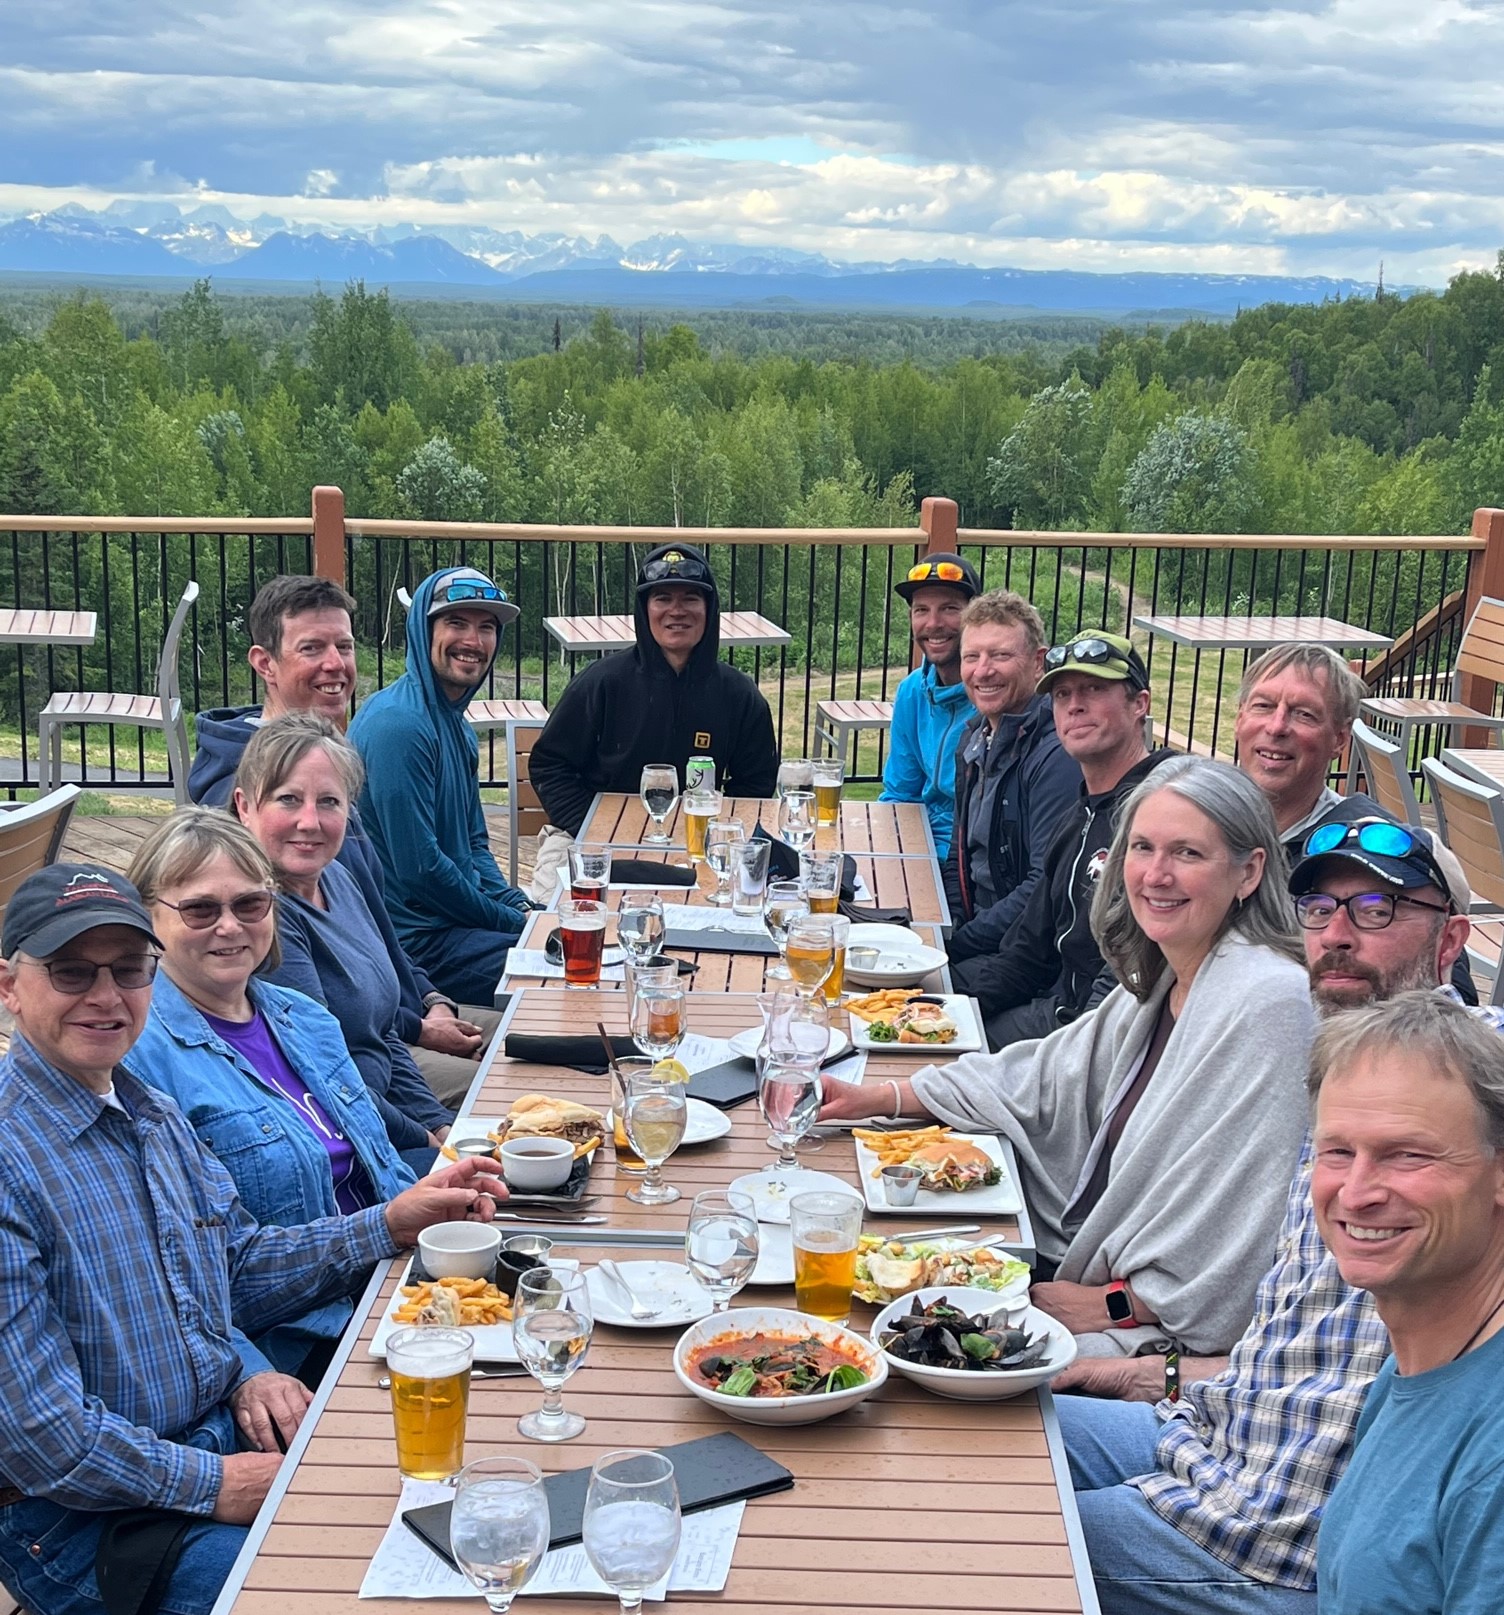 A table of smiling people at dine on an outdoor deck